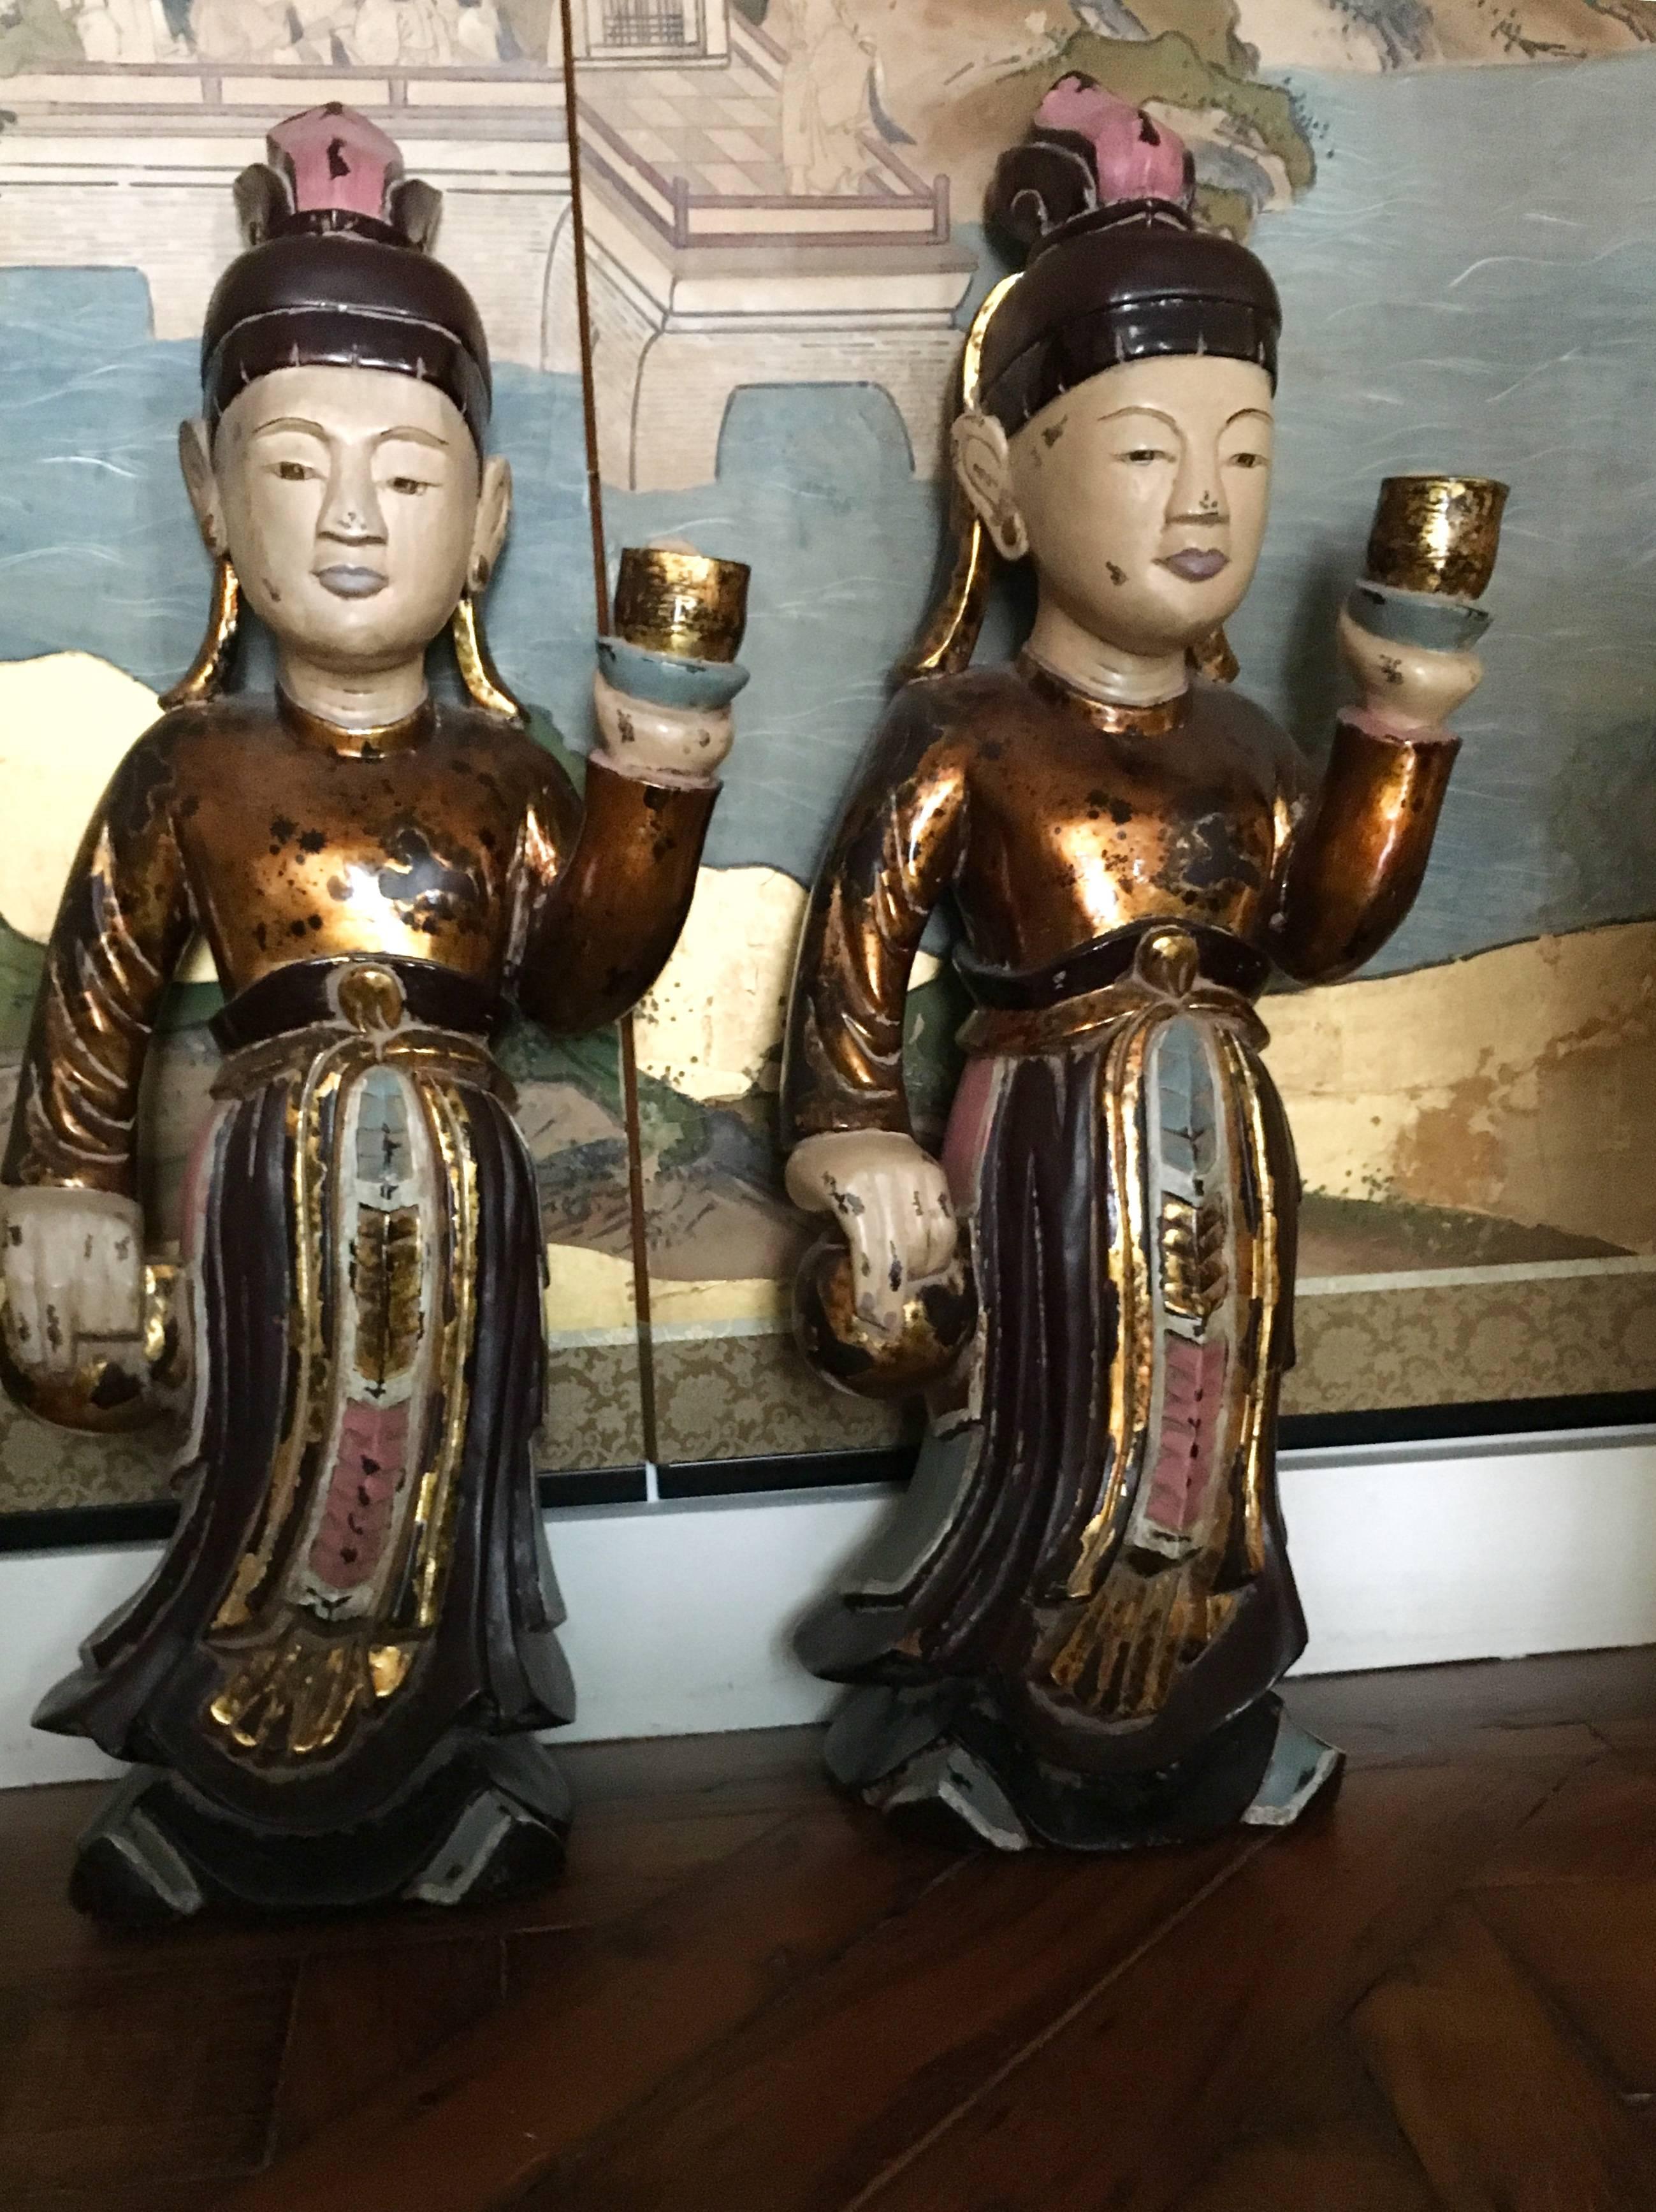 Two wooden sculptures of Worshipers, both standing, wearing undergarment
Secured with a ribbon. Gold leaf, black lacquered and brilliant polychrome pigments on wood.
Vietnam, 20th century.
They can make outstanding lamps.
Size: 82 by 35 by 24 cm.